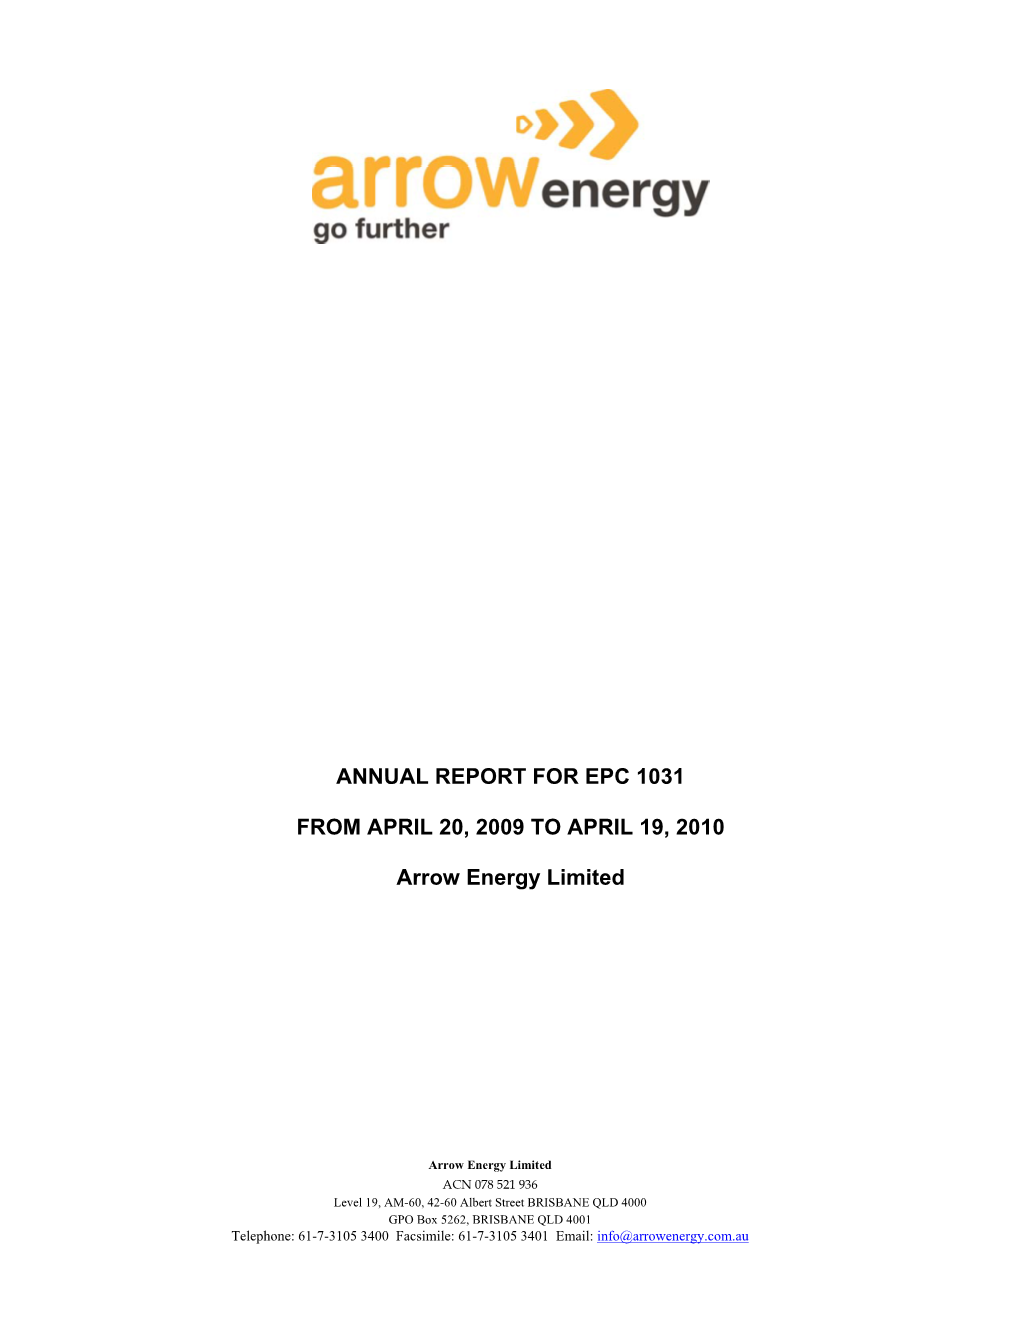 Annual Report for Epc 1031 from April 20